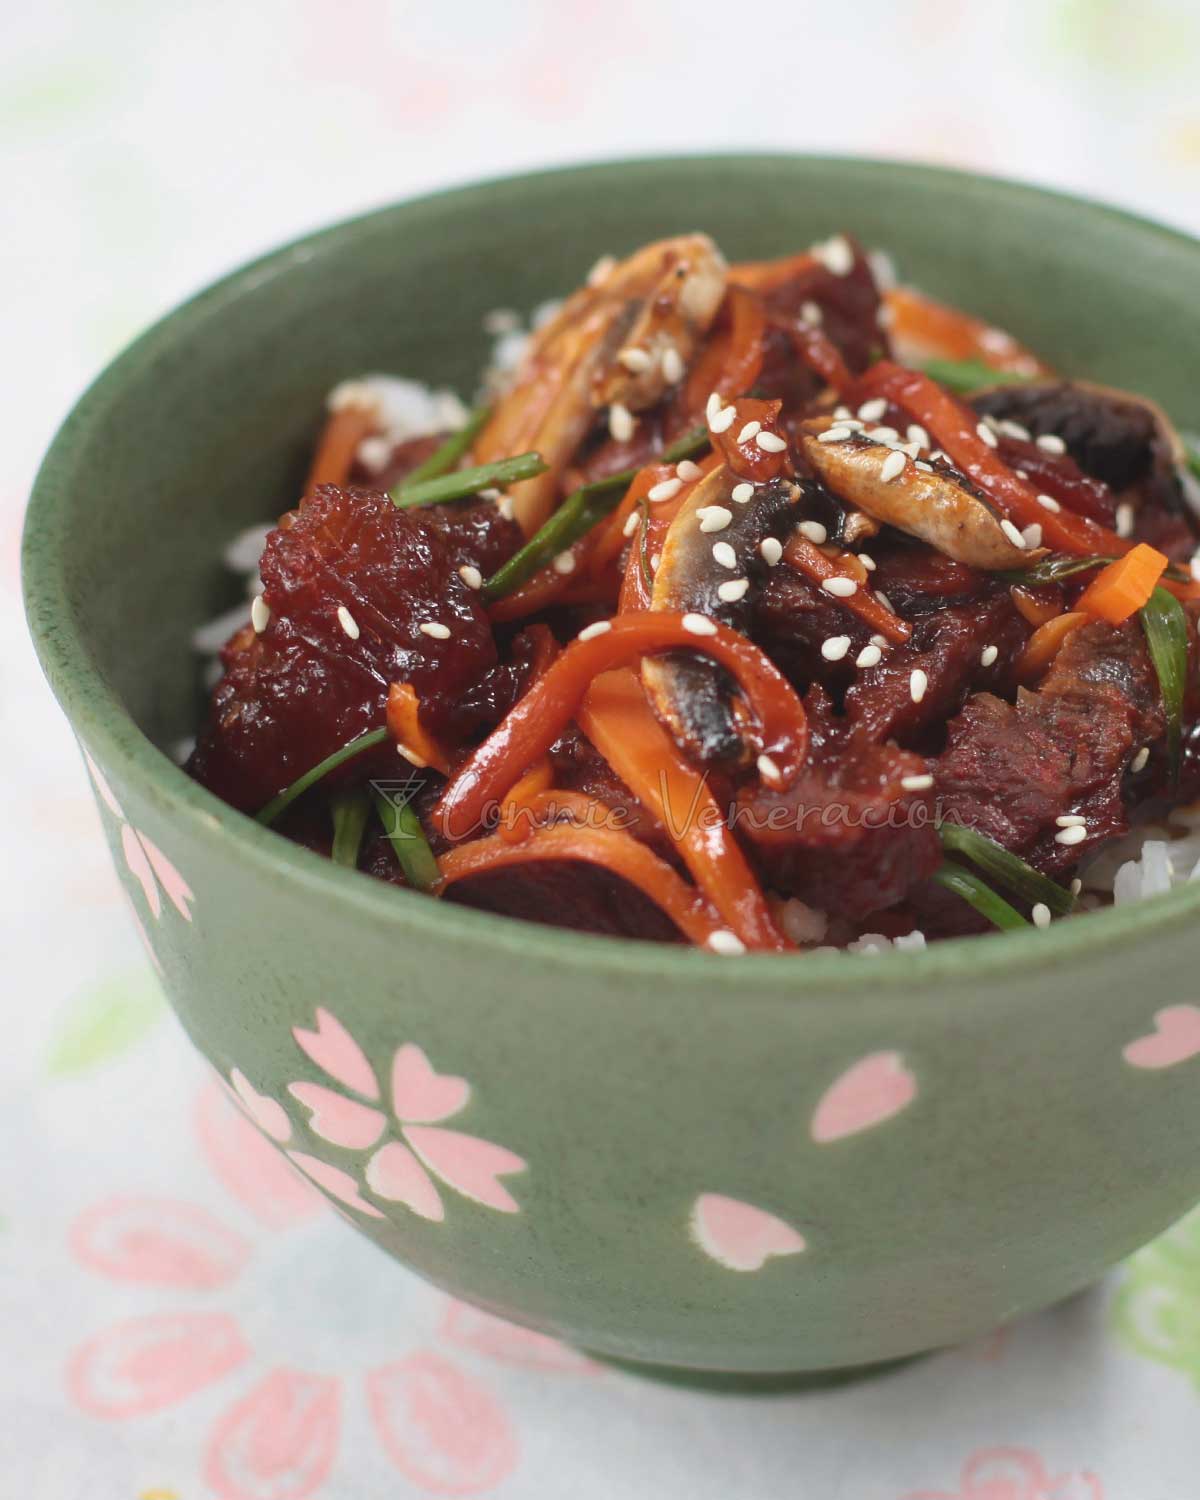 Mongolian Beef Barbecue Sprinkled with Sesame Seeds